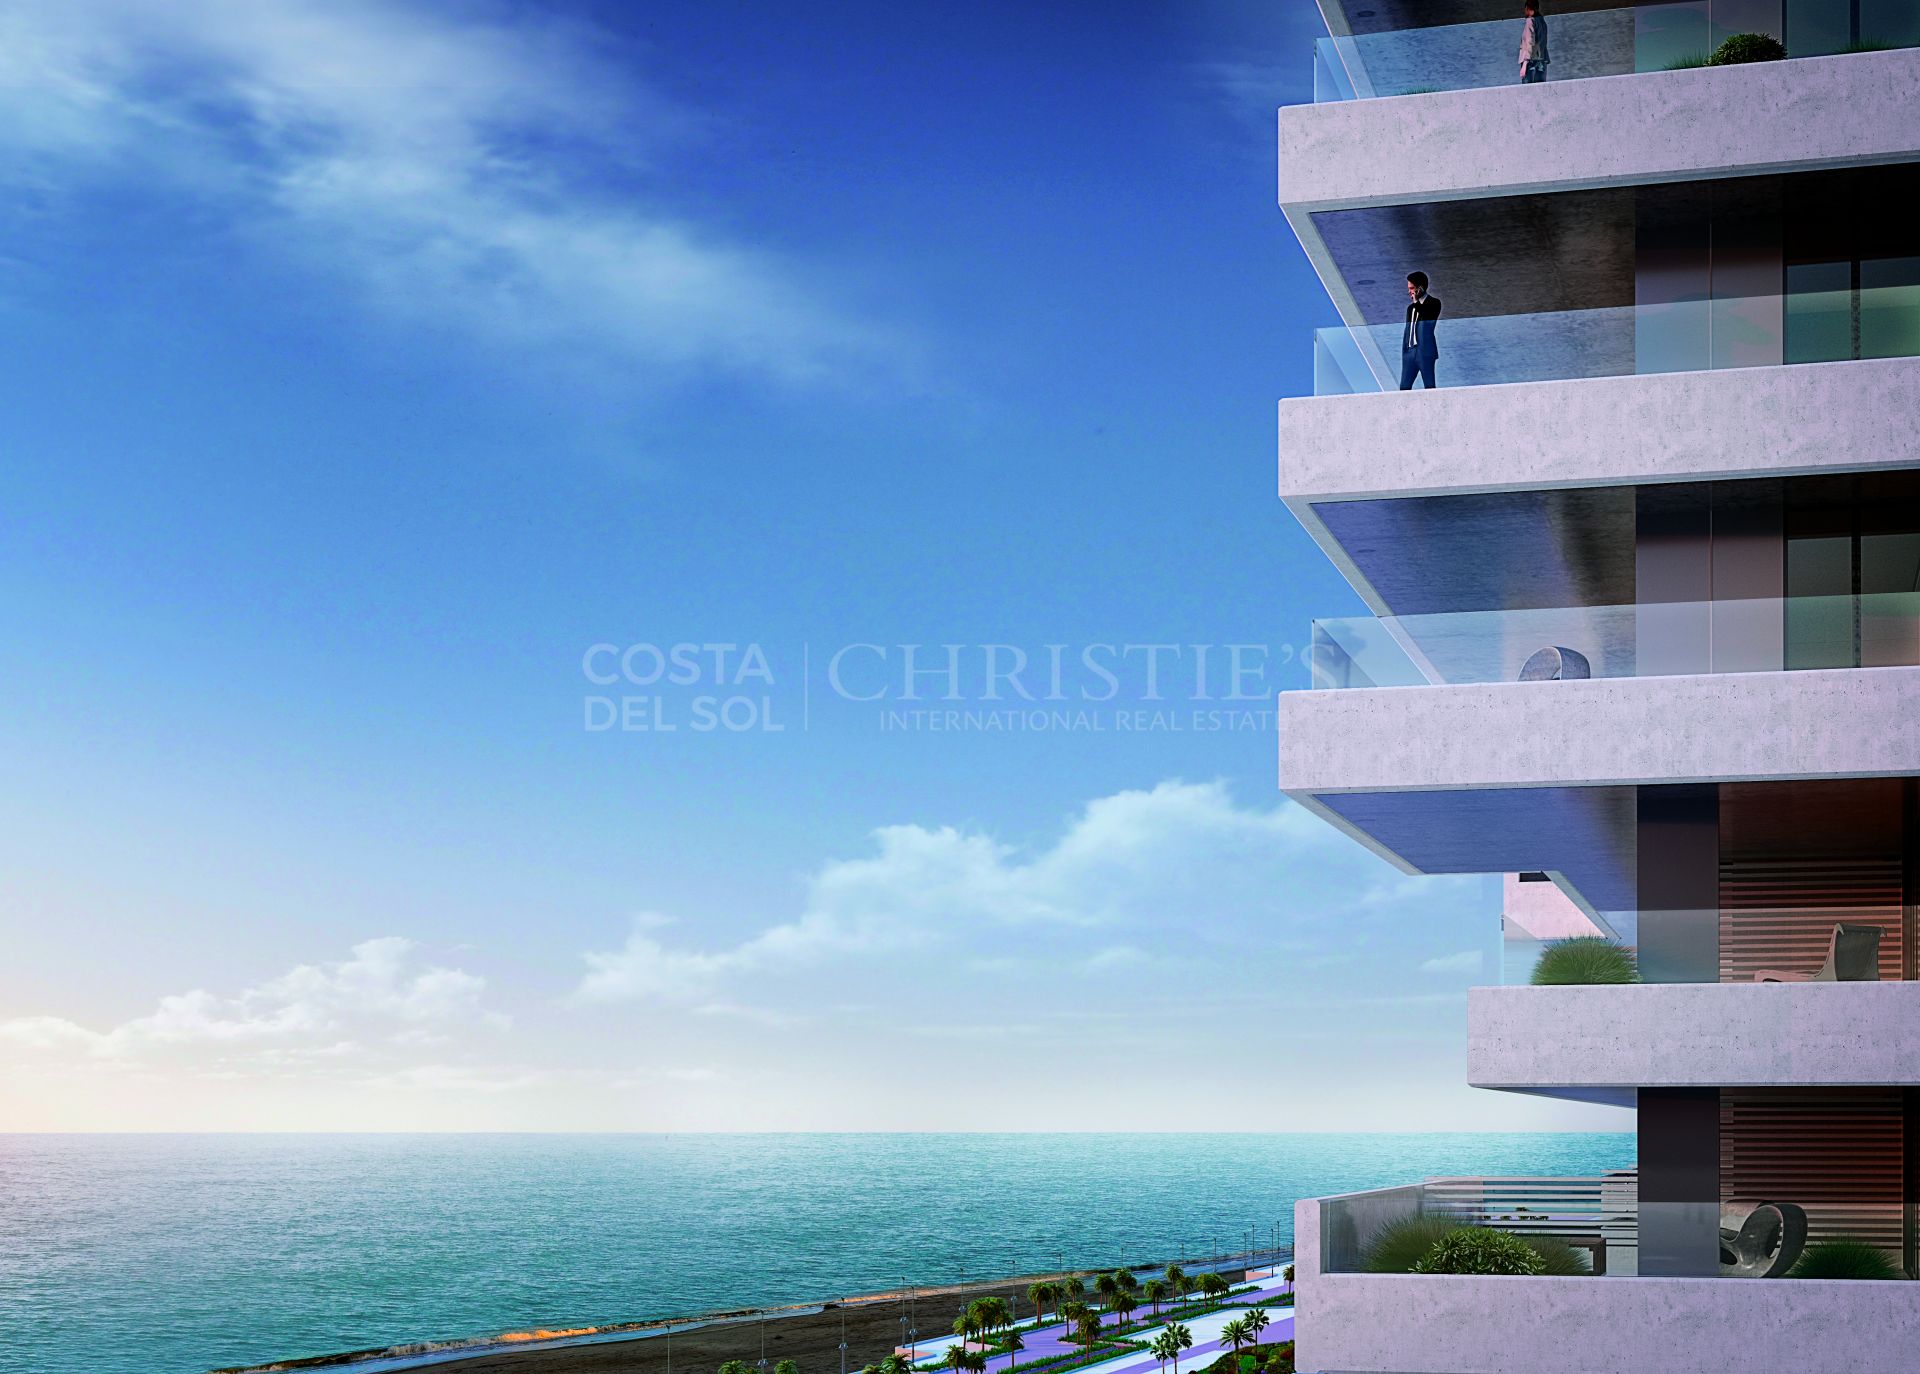 Luxury modern apartments on the seafront with spectacular views